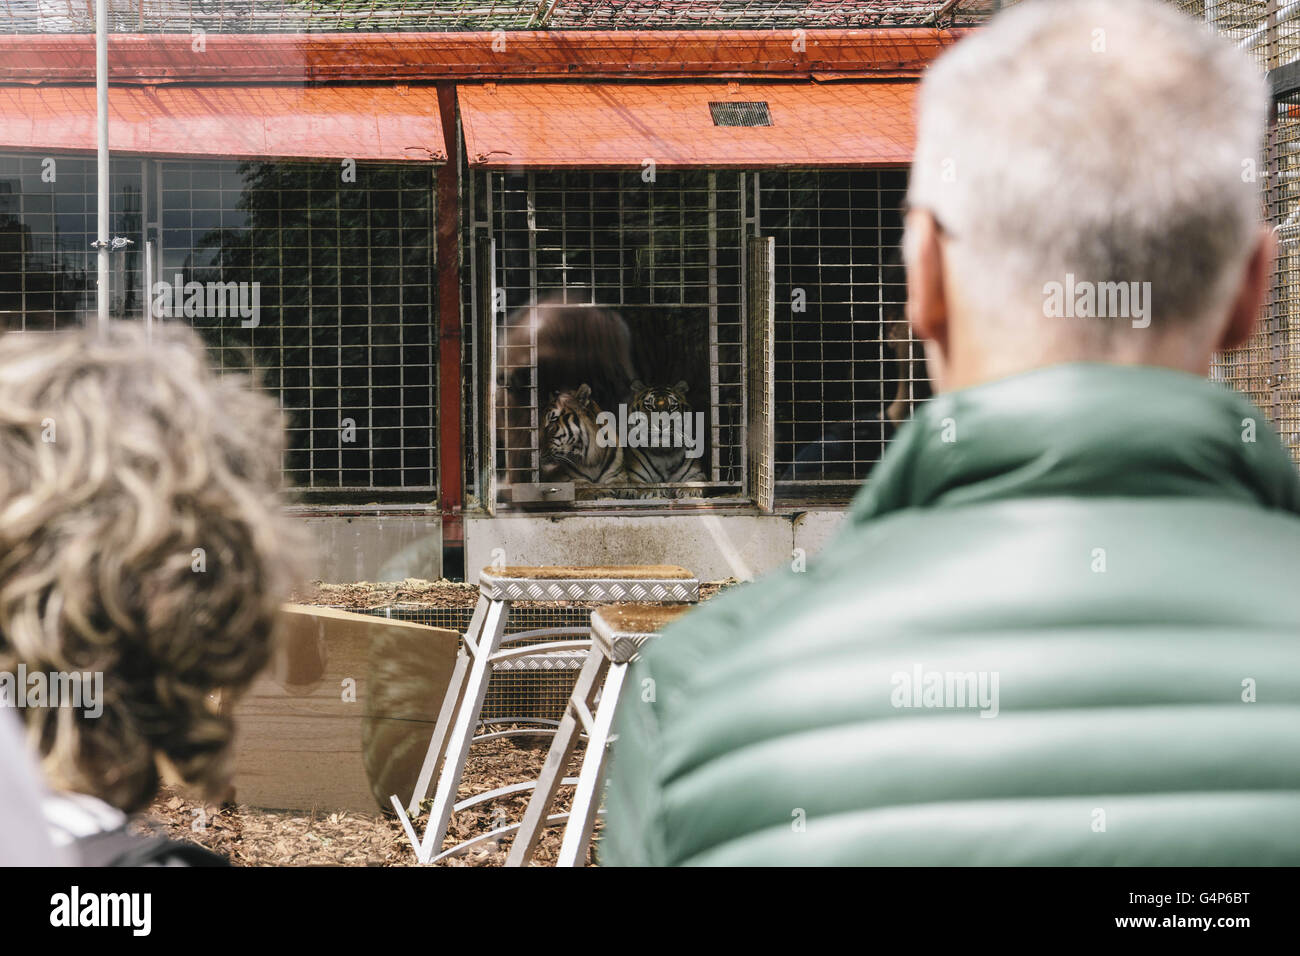 Berlin, Berlin, Germany. 18th June, 2016. Spectators in front of the installation of the project. The political art group 'Center for Political Beauty' (Zentrum fÃ¼r Politische SchÃ¶nheit, ZPS) sets up Roman-style arena for refugees to be devoured by tigers in outside the Maxim Gorki theater in Berlin. © Jan Scheunert/ZUMA Wire/Alamy Live News Stock Photo